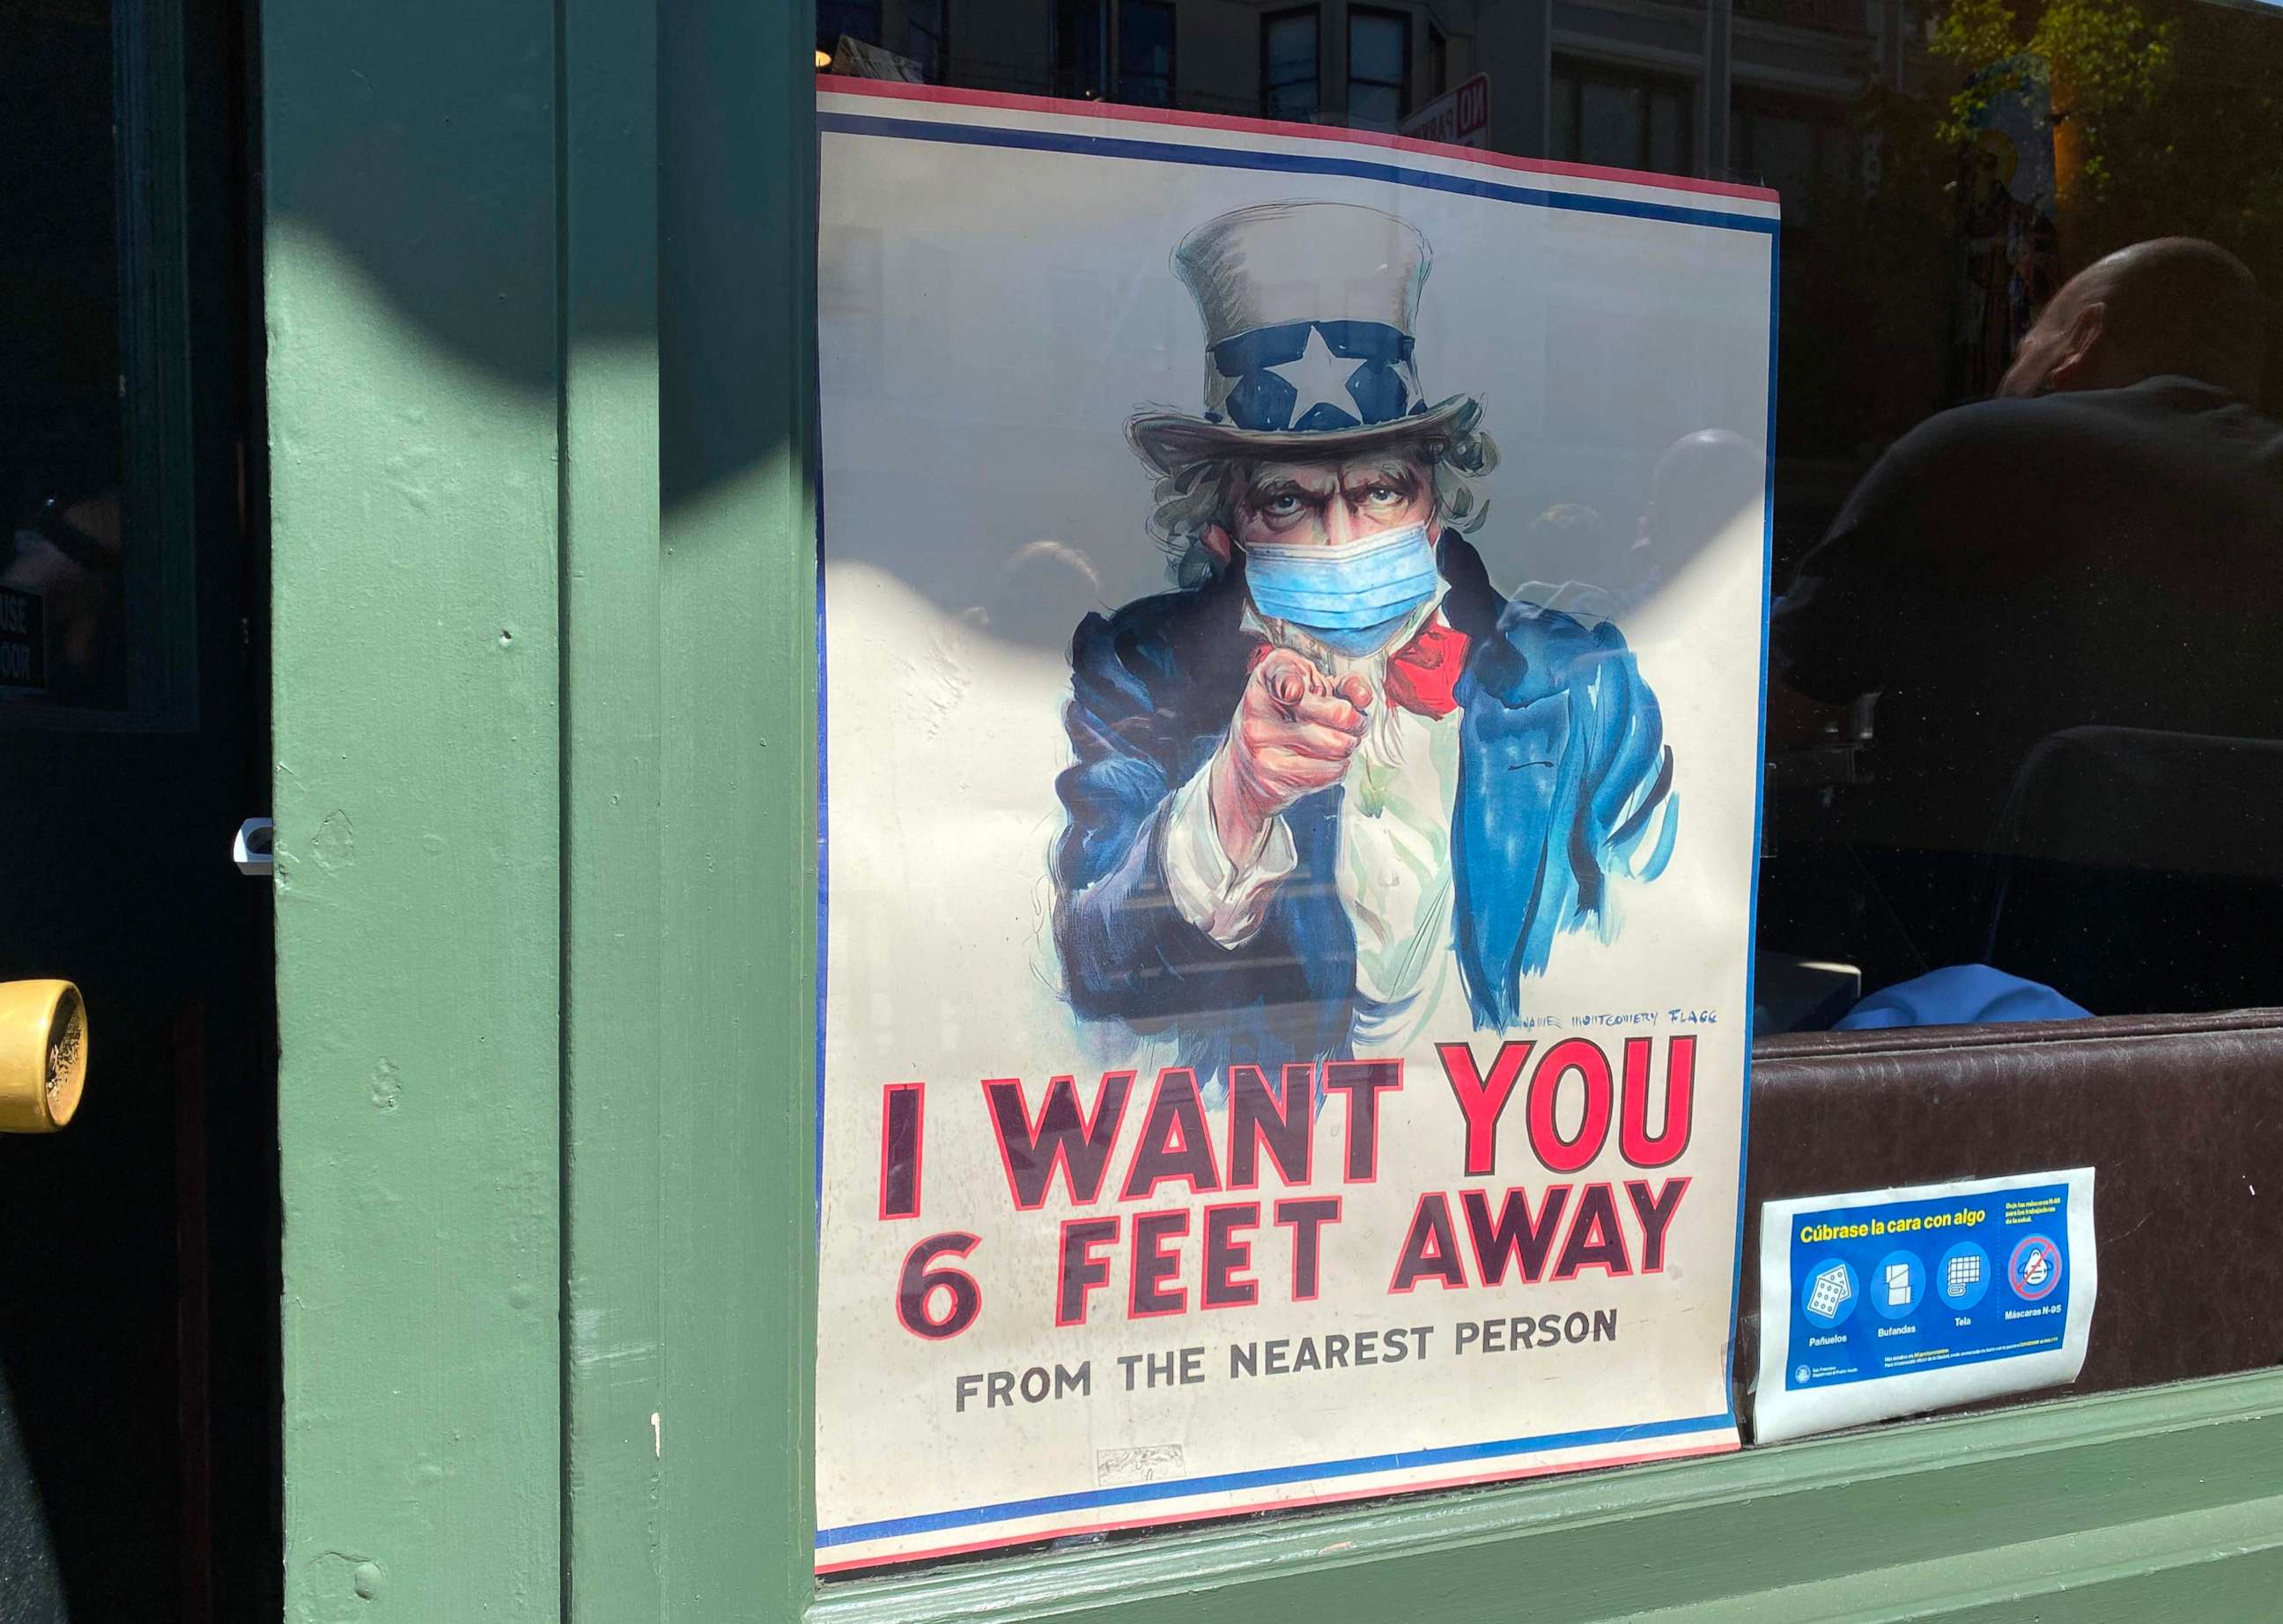 PHOTO: The iconic "I Want You for U.S. Army" Uncle Sam poster is seen wearing a mask and demanding people to stand six feet away in San Francisco, California, on July 31, 2020.